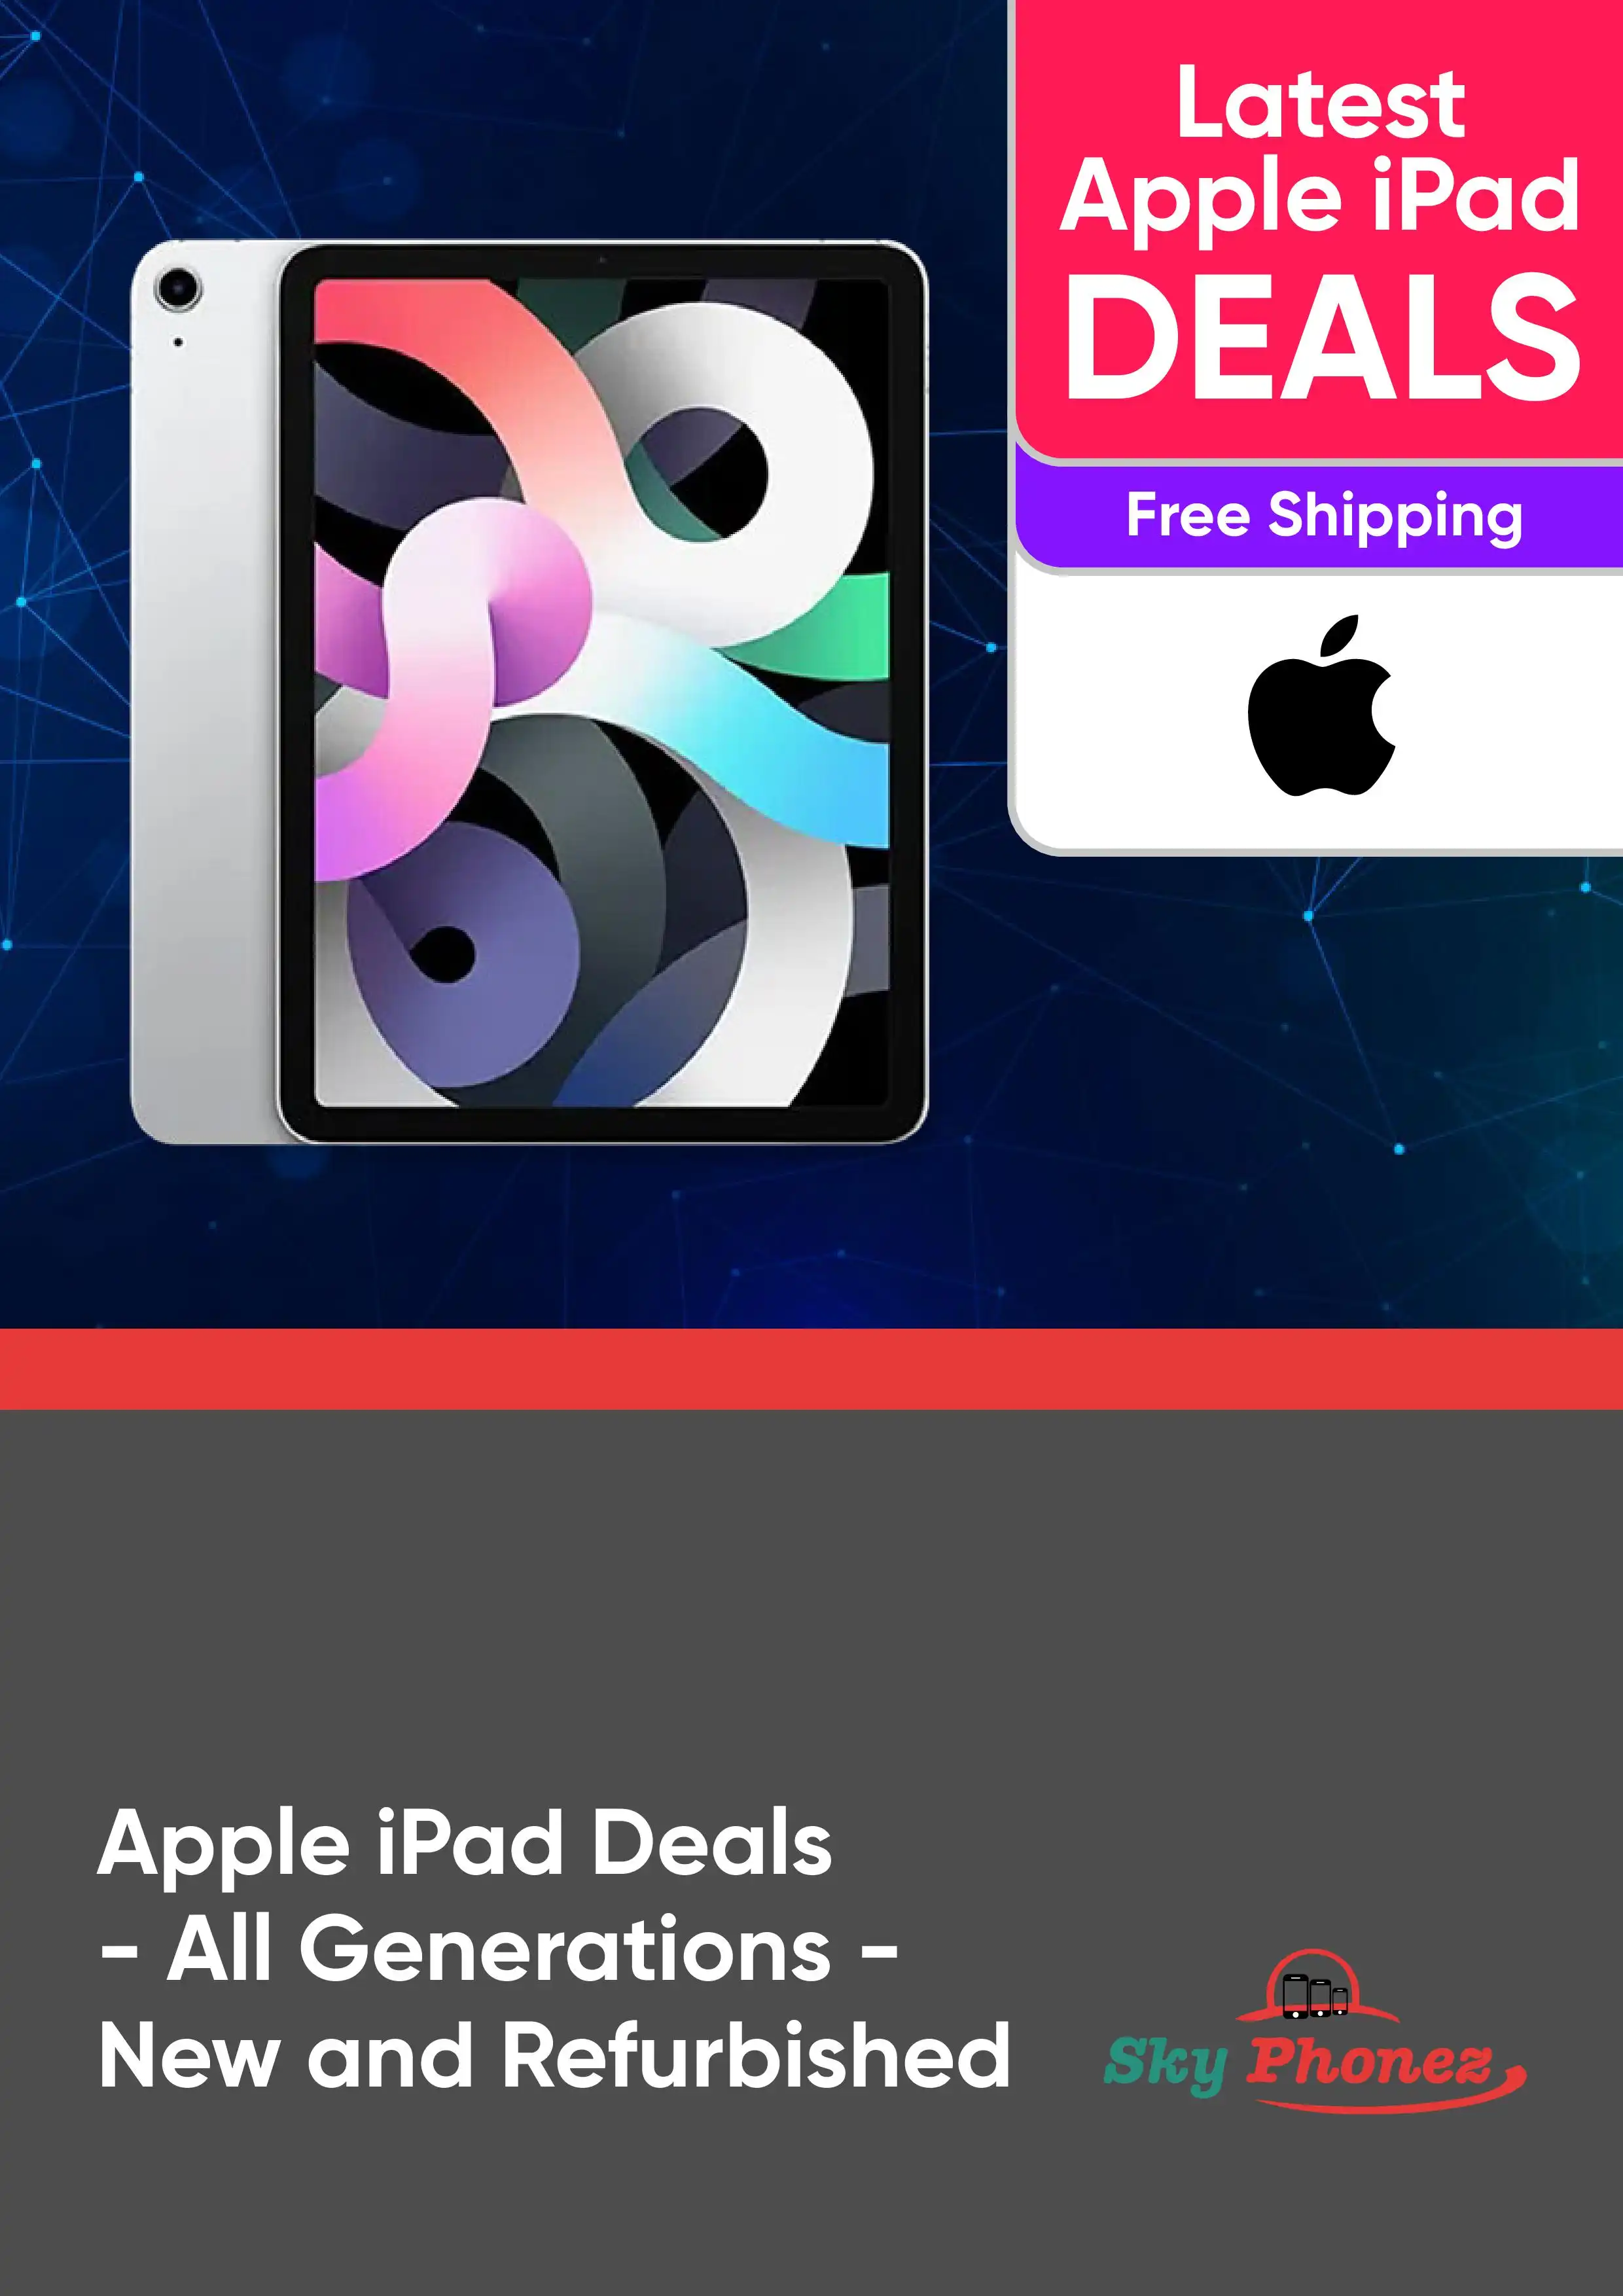 Apple iPad Deals - All Generations - New and Refurbished